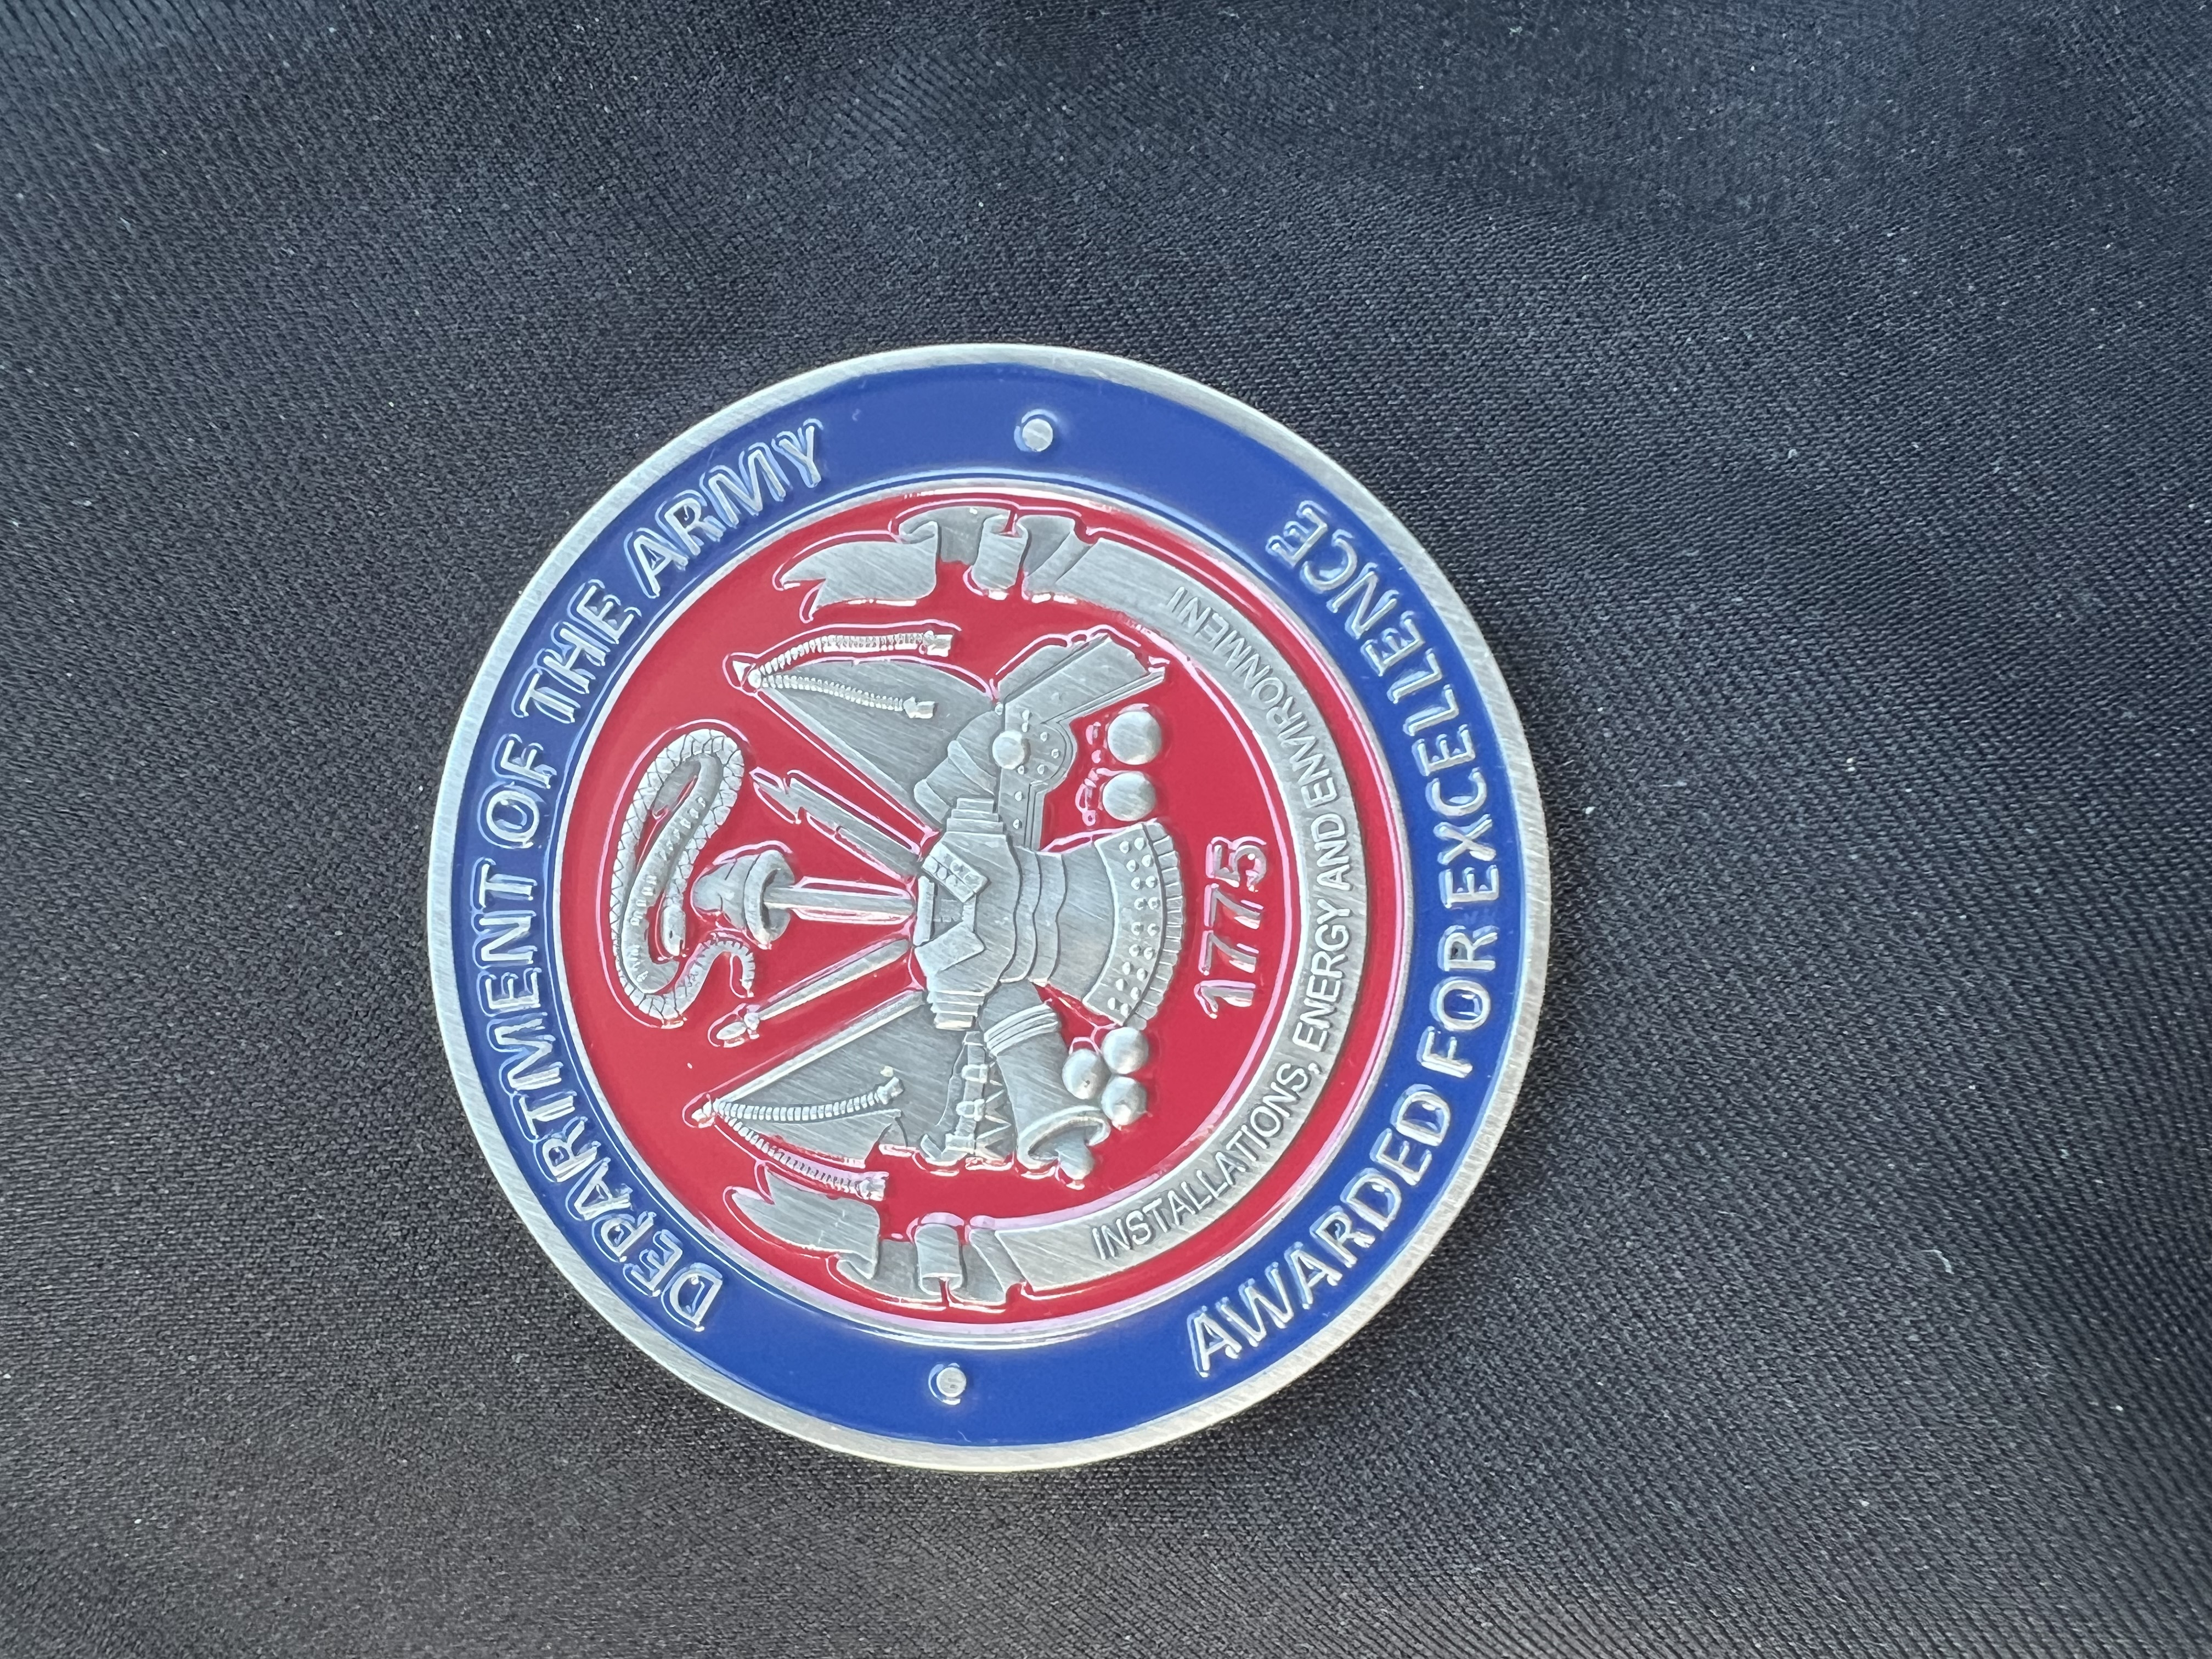 Guernsey Earns Award of Excellence Coin for Energy Efficiency and Resiliency Studies for the Army3